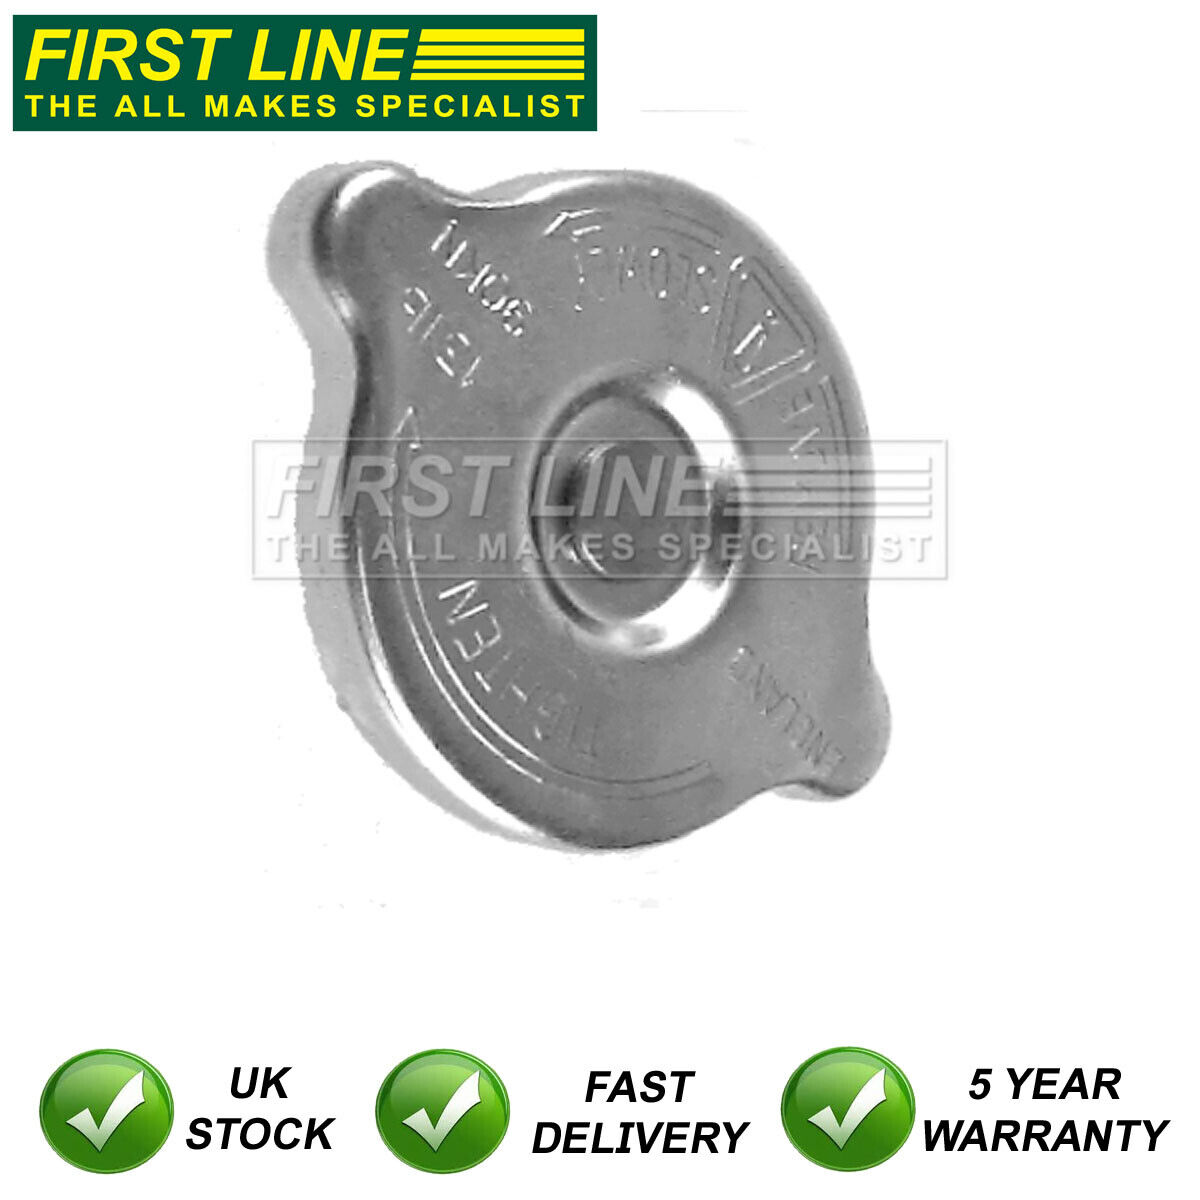 Radiator Cap First Line Fits Ford Cortina 1970-1982 214309C002